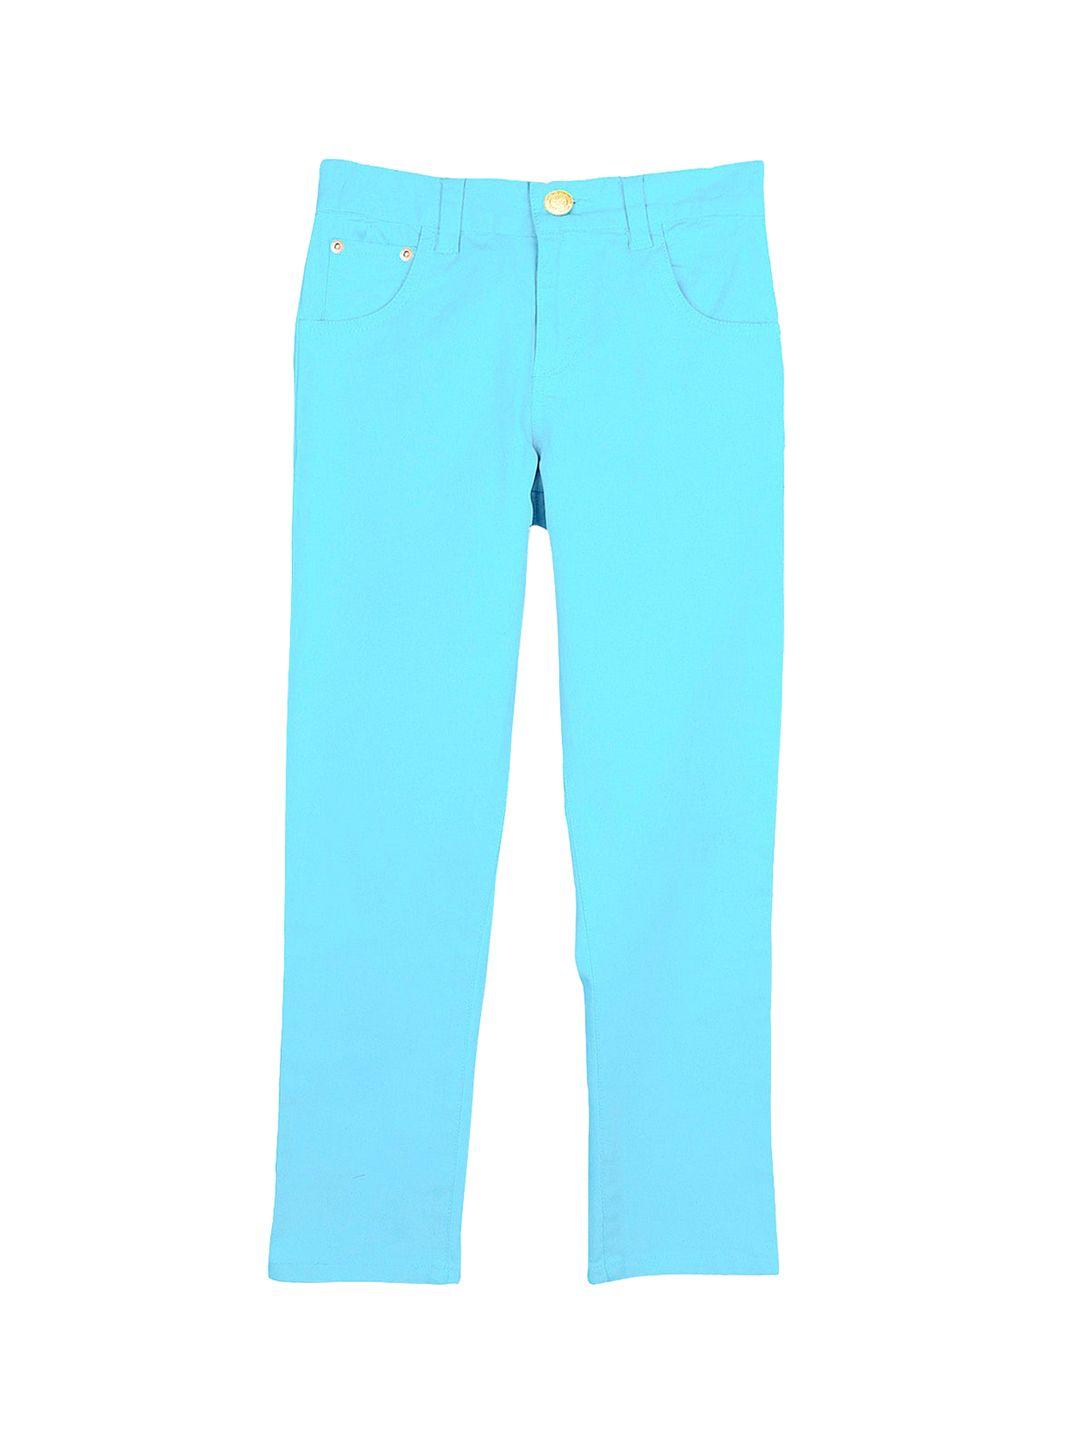 cherry-crumble-boys-and-girls-blue-solid-cotton-twill-sky-blue-jeans